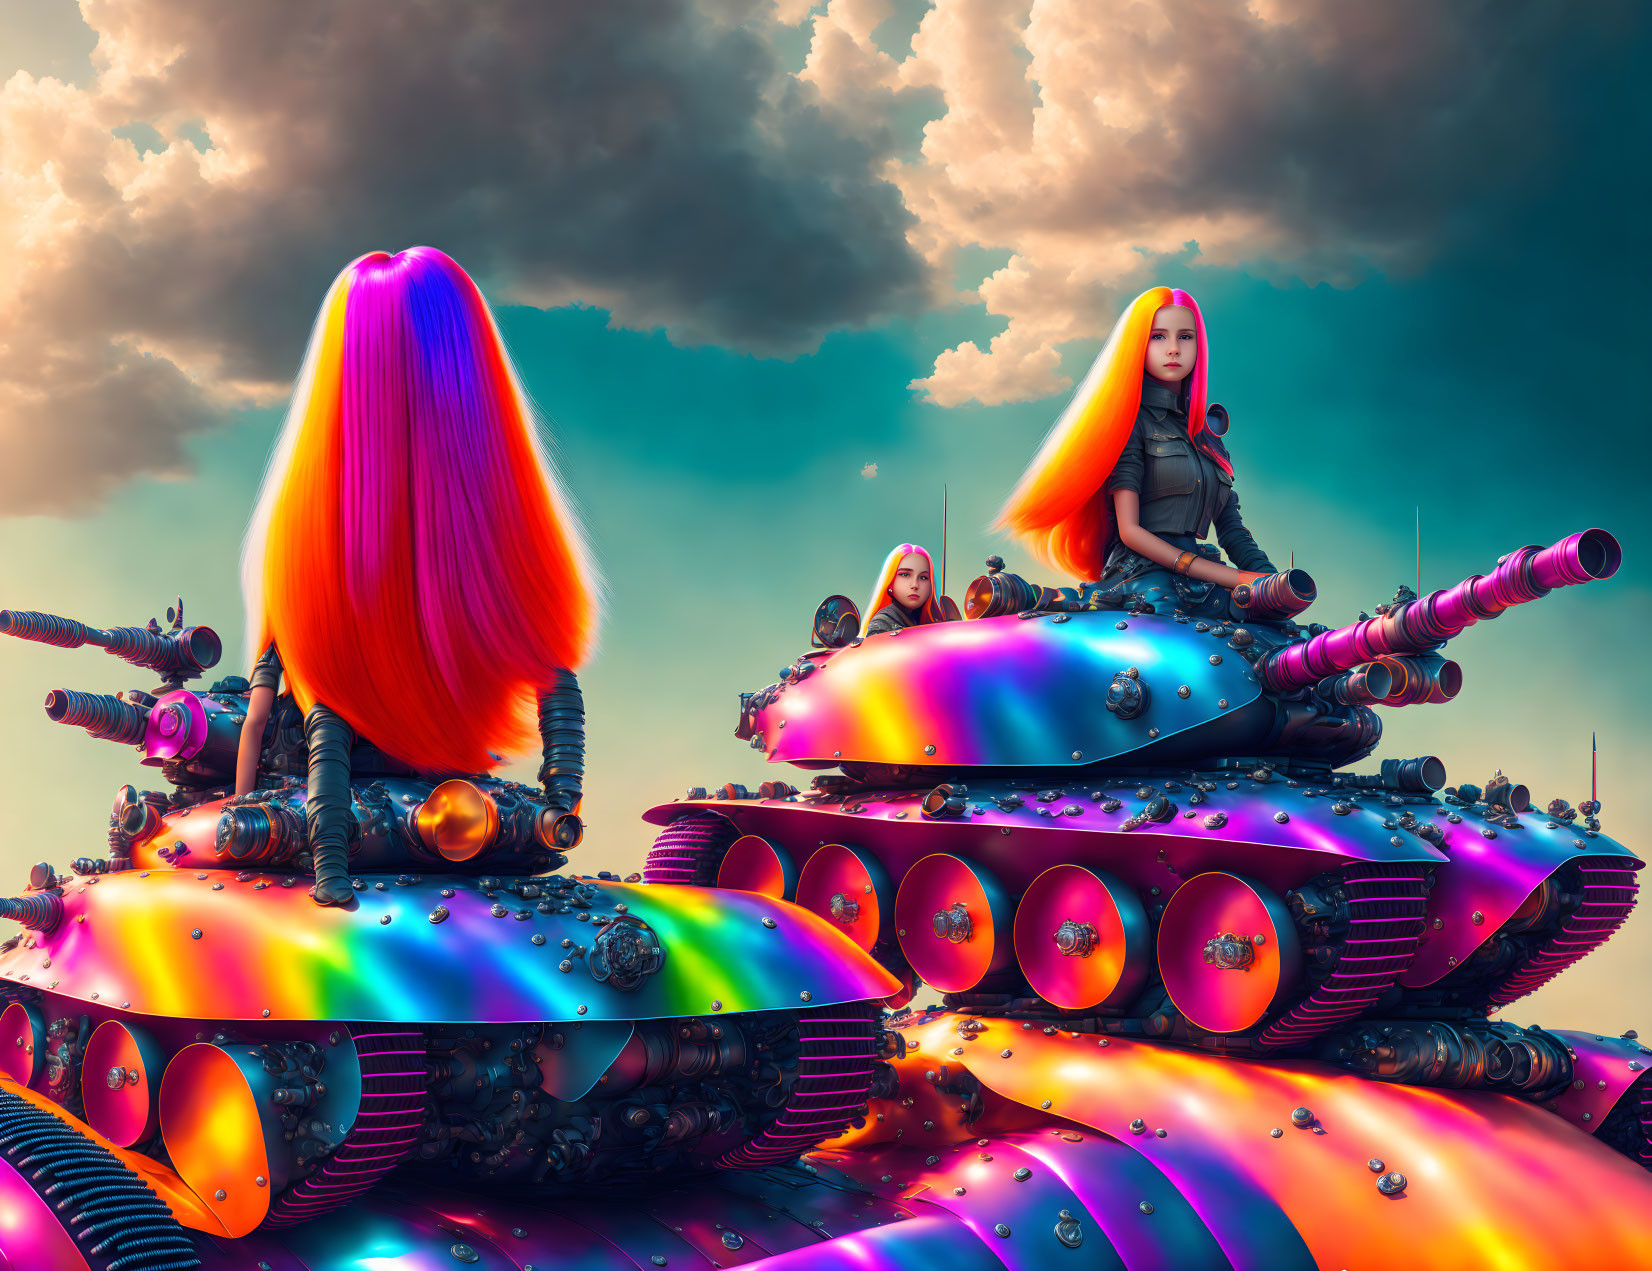 Colorful tank-like vehicles and vibrant-haired females in futuristic scene